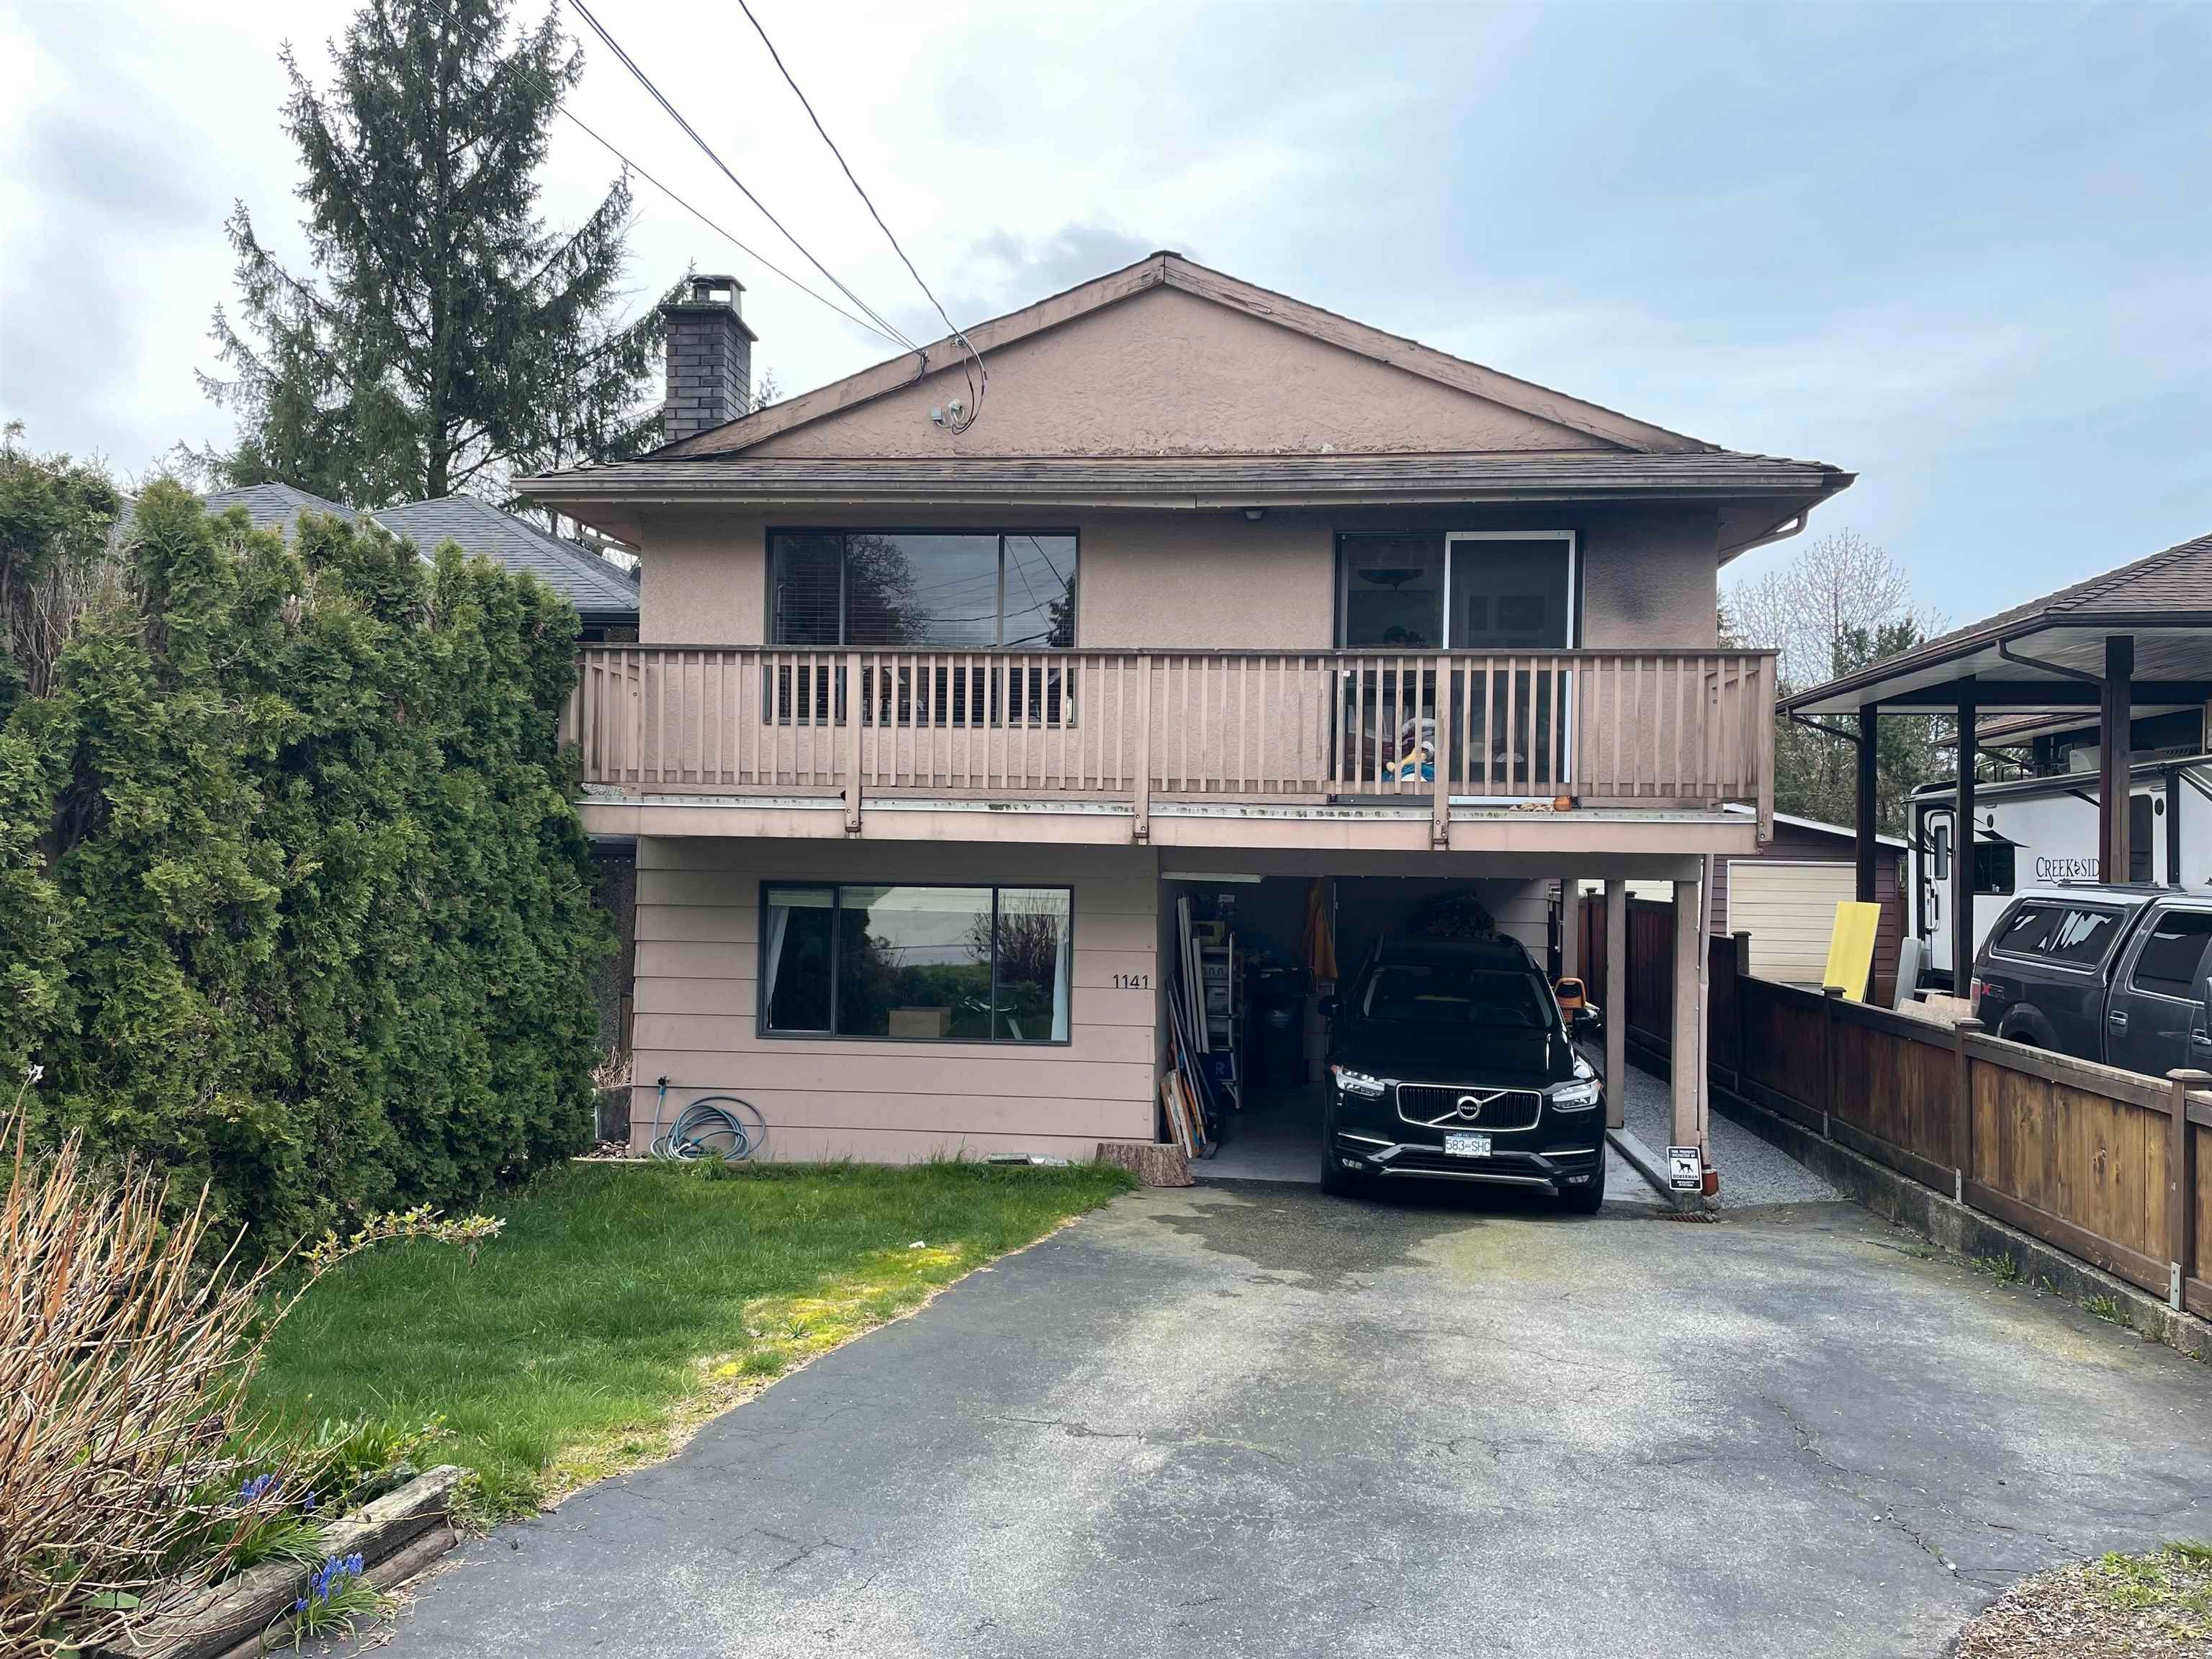 I have sold a property at 1141 RONAYNE RD in North Vancouver
